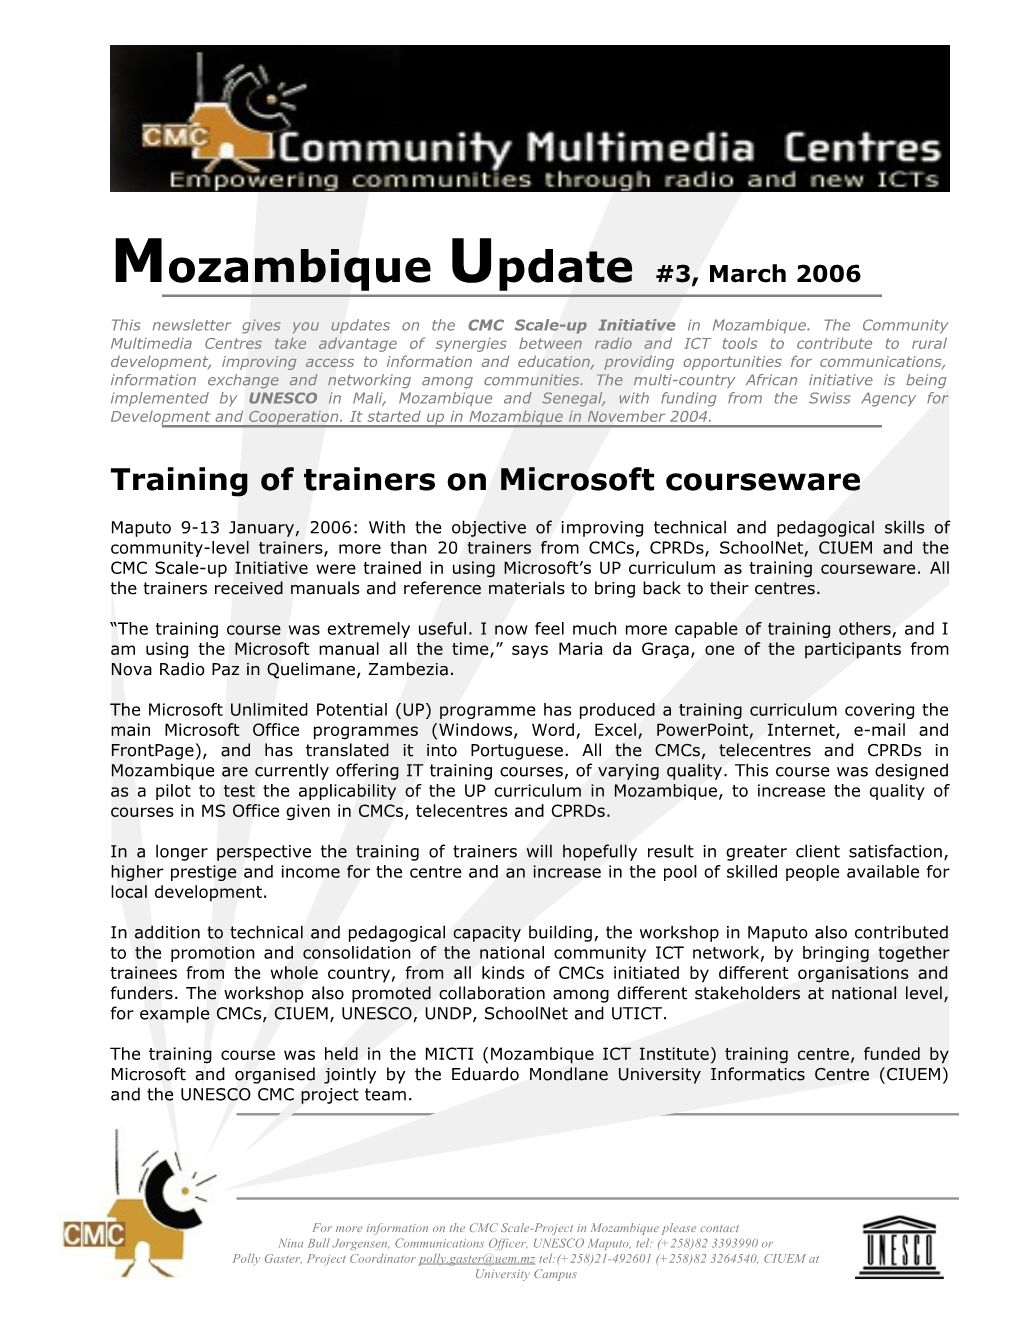 Training of Trainers on Microsoft Courseware